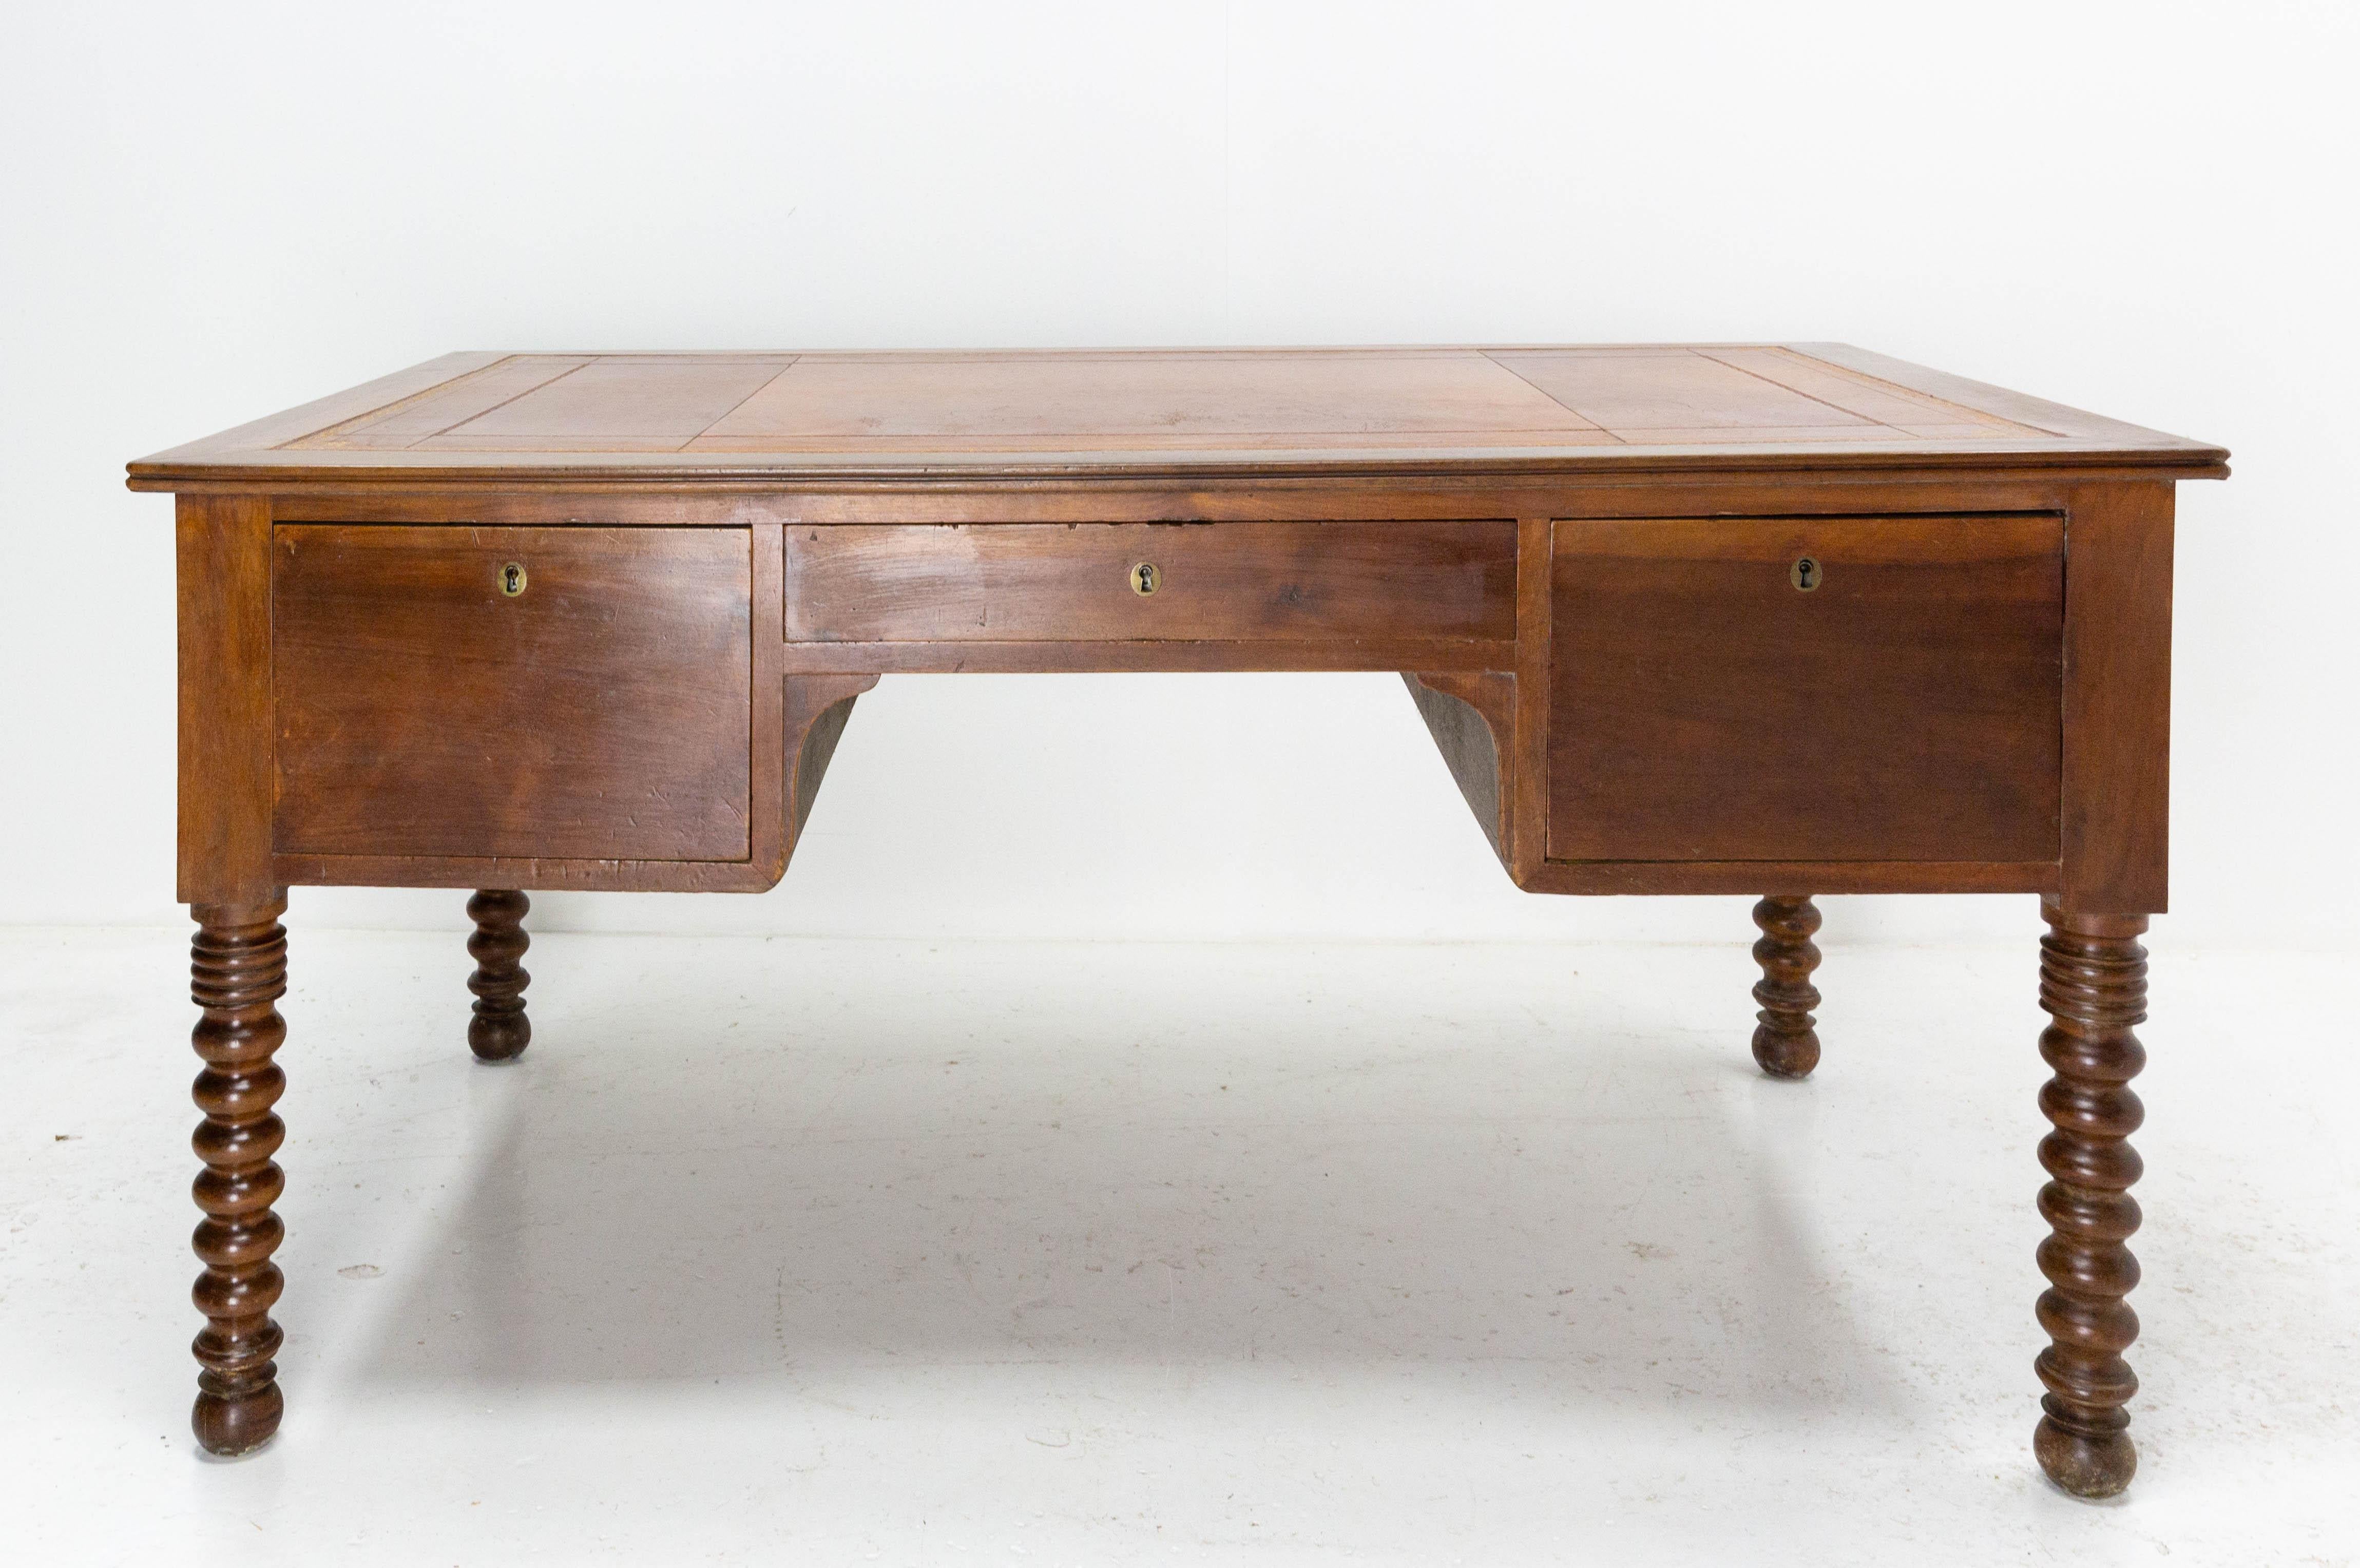 French 19th century Louis Philippe walnut desk, the top is recovered of aniline leather
Three drawers and turned legs,
Good condition.

Shipping: W 150, H 75, P 96.5 cm 64 kg.